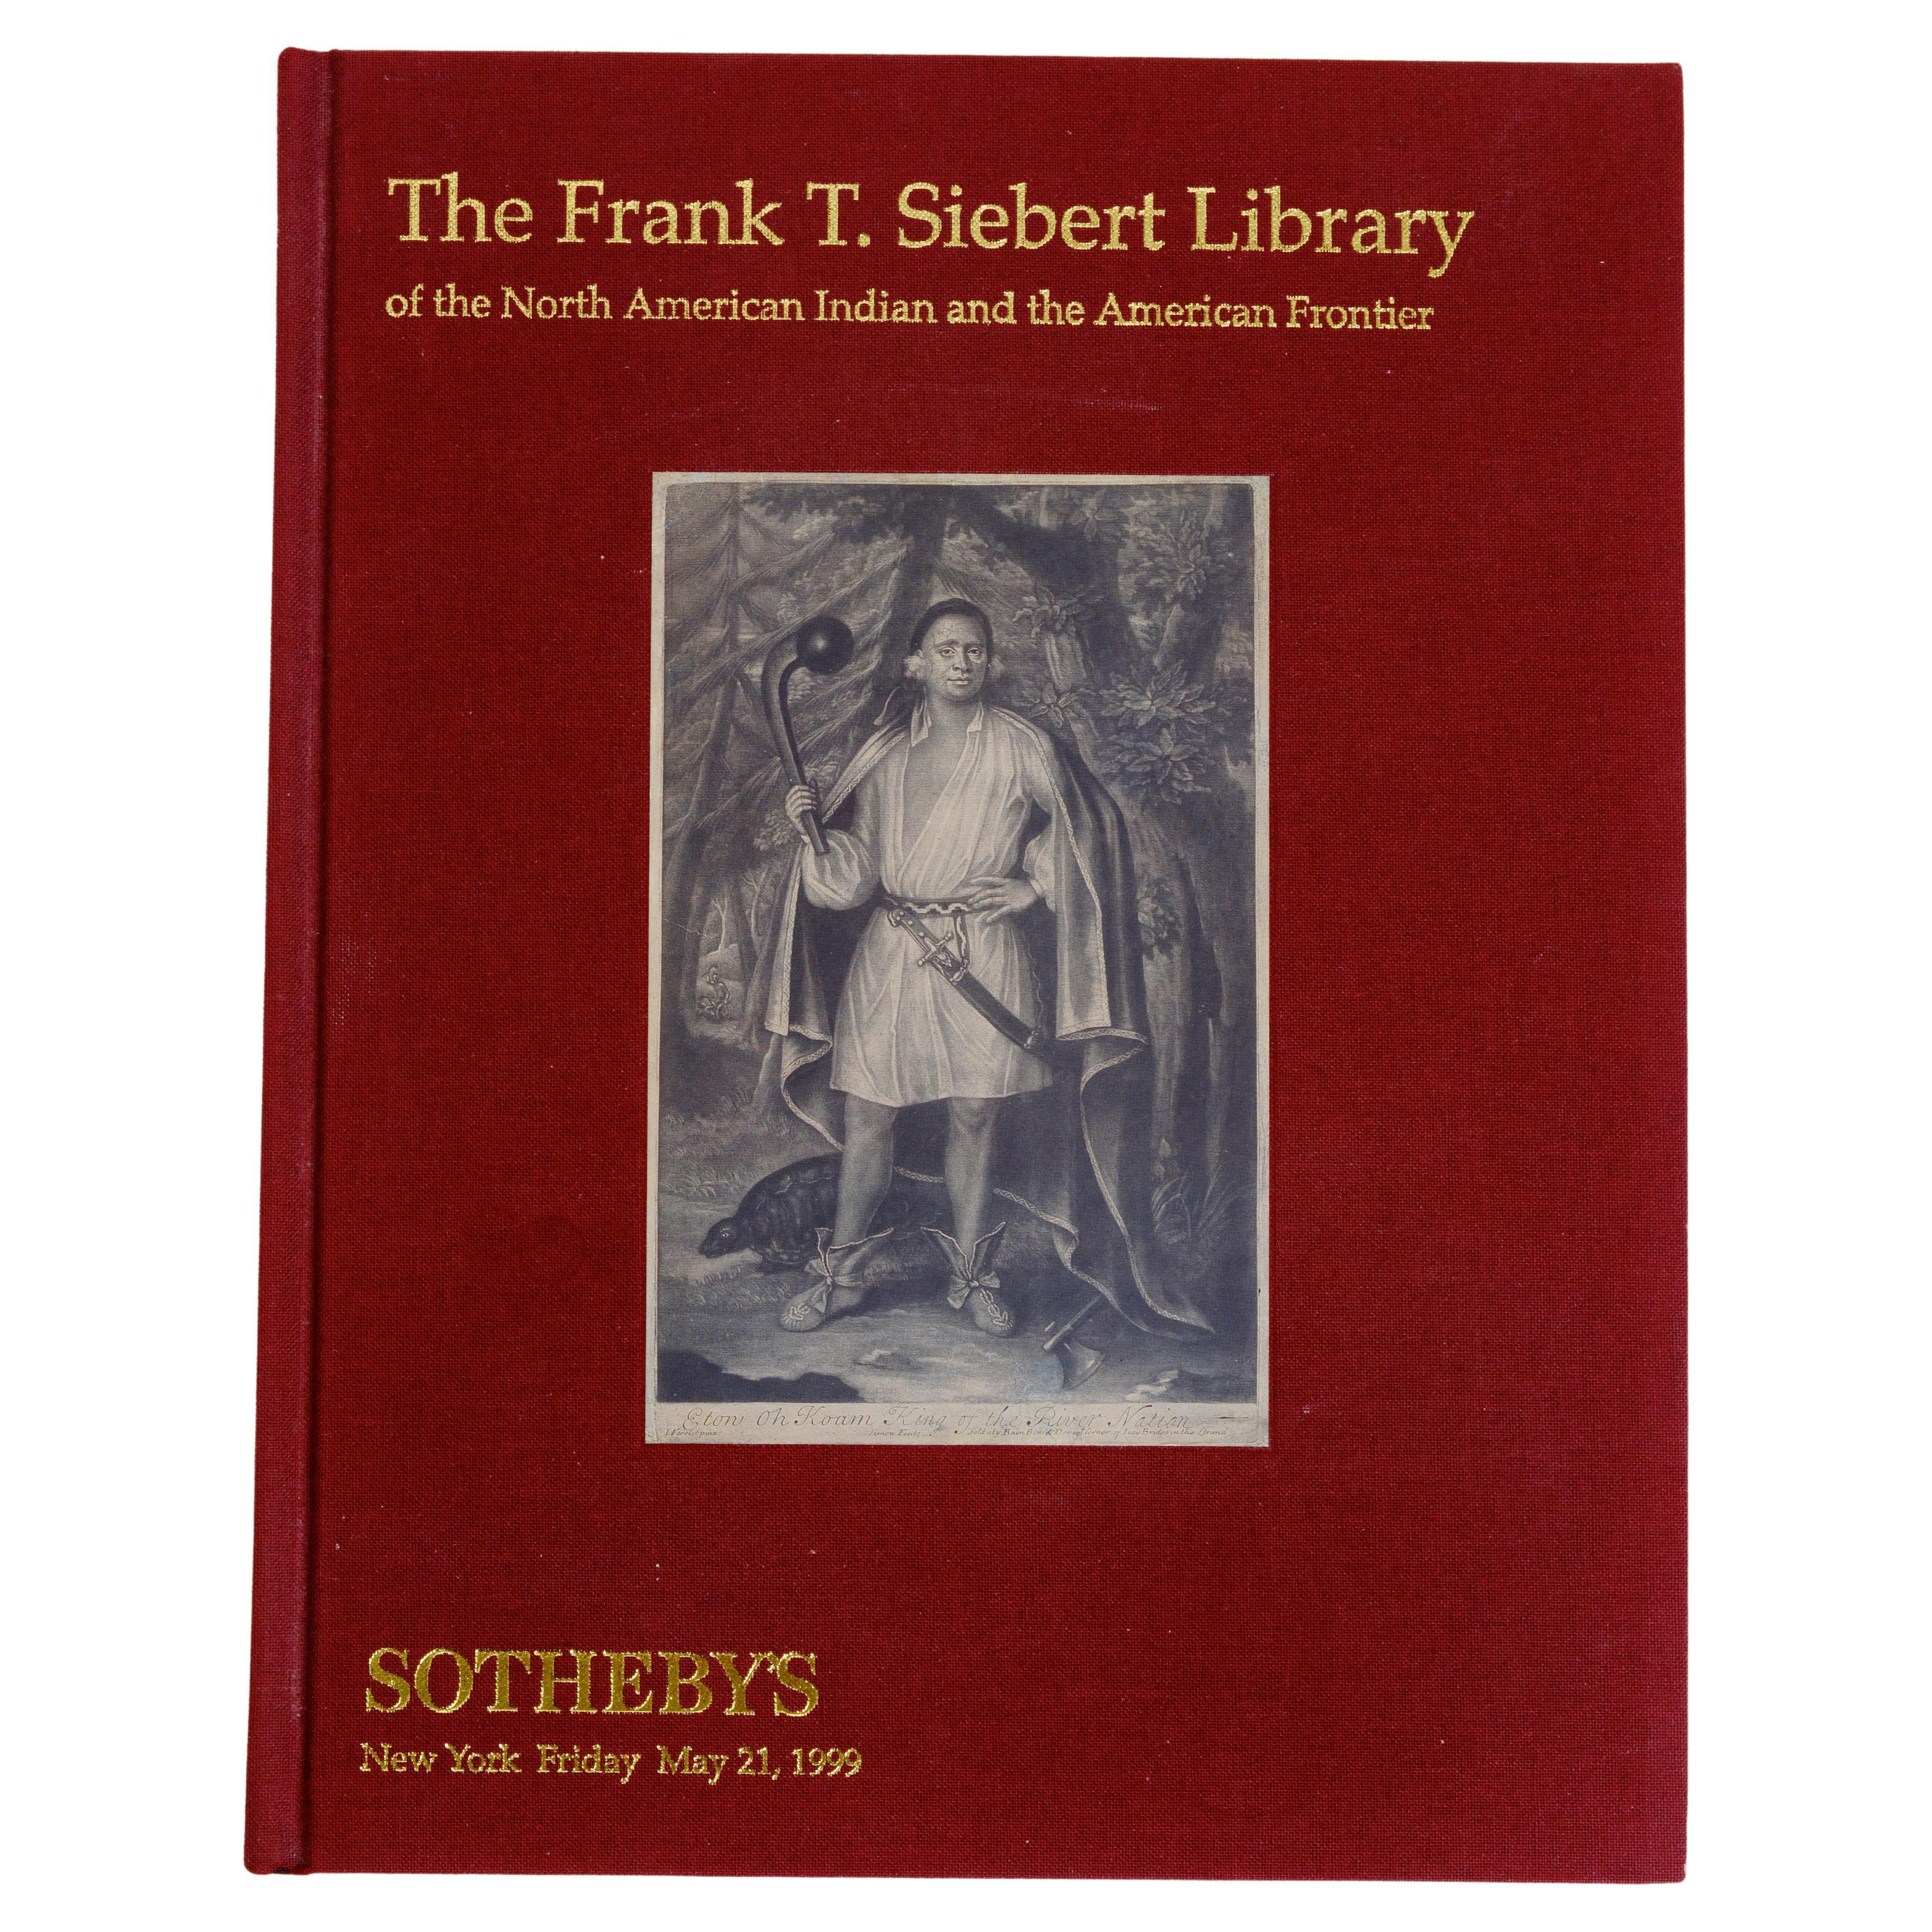 The Frank T. Siebert Library of the North American Indian and American Frontier 